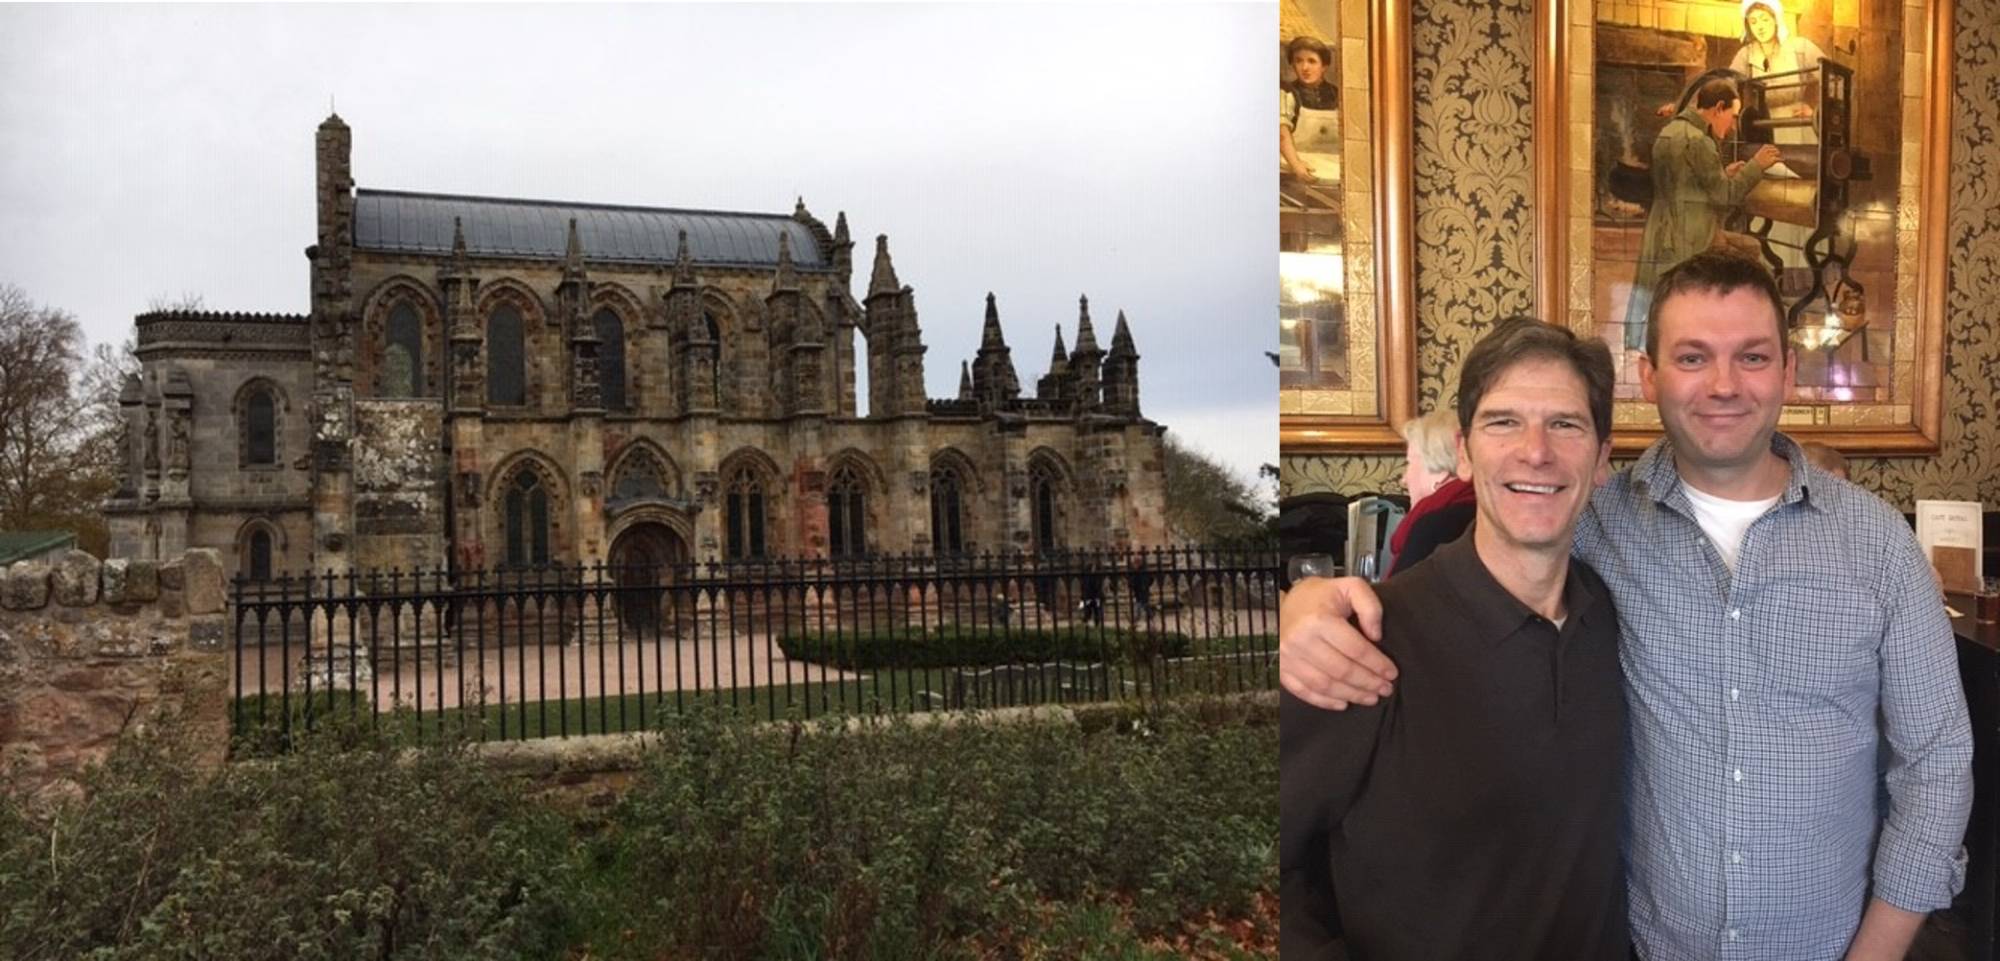 Rosslyn Chapel, built in 1464, famous for its role in the Da Vinci Code.  Al with Bryan Spears at a local pub.